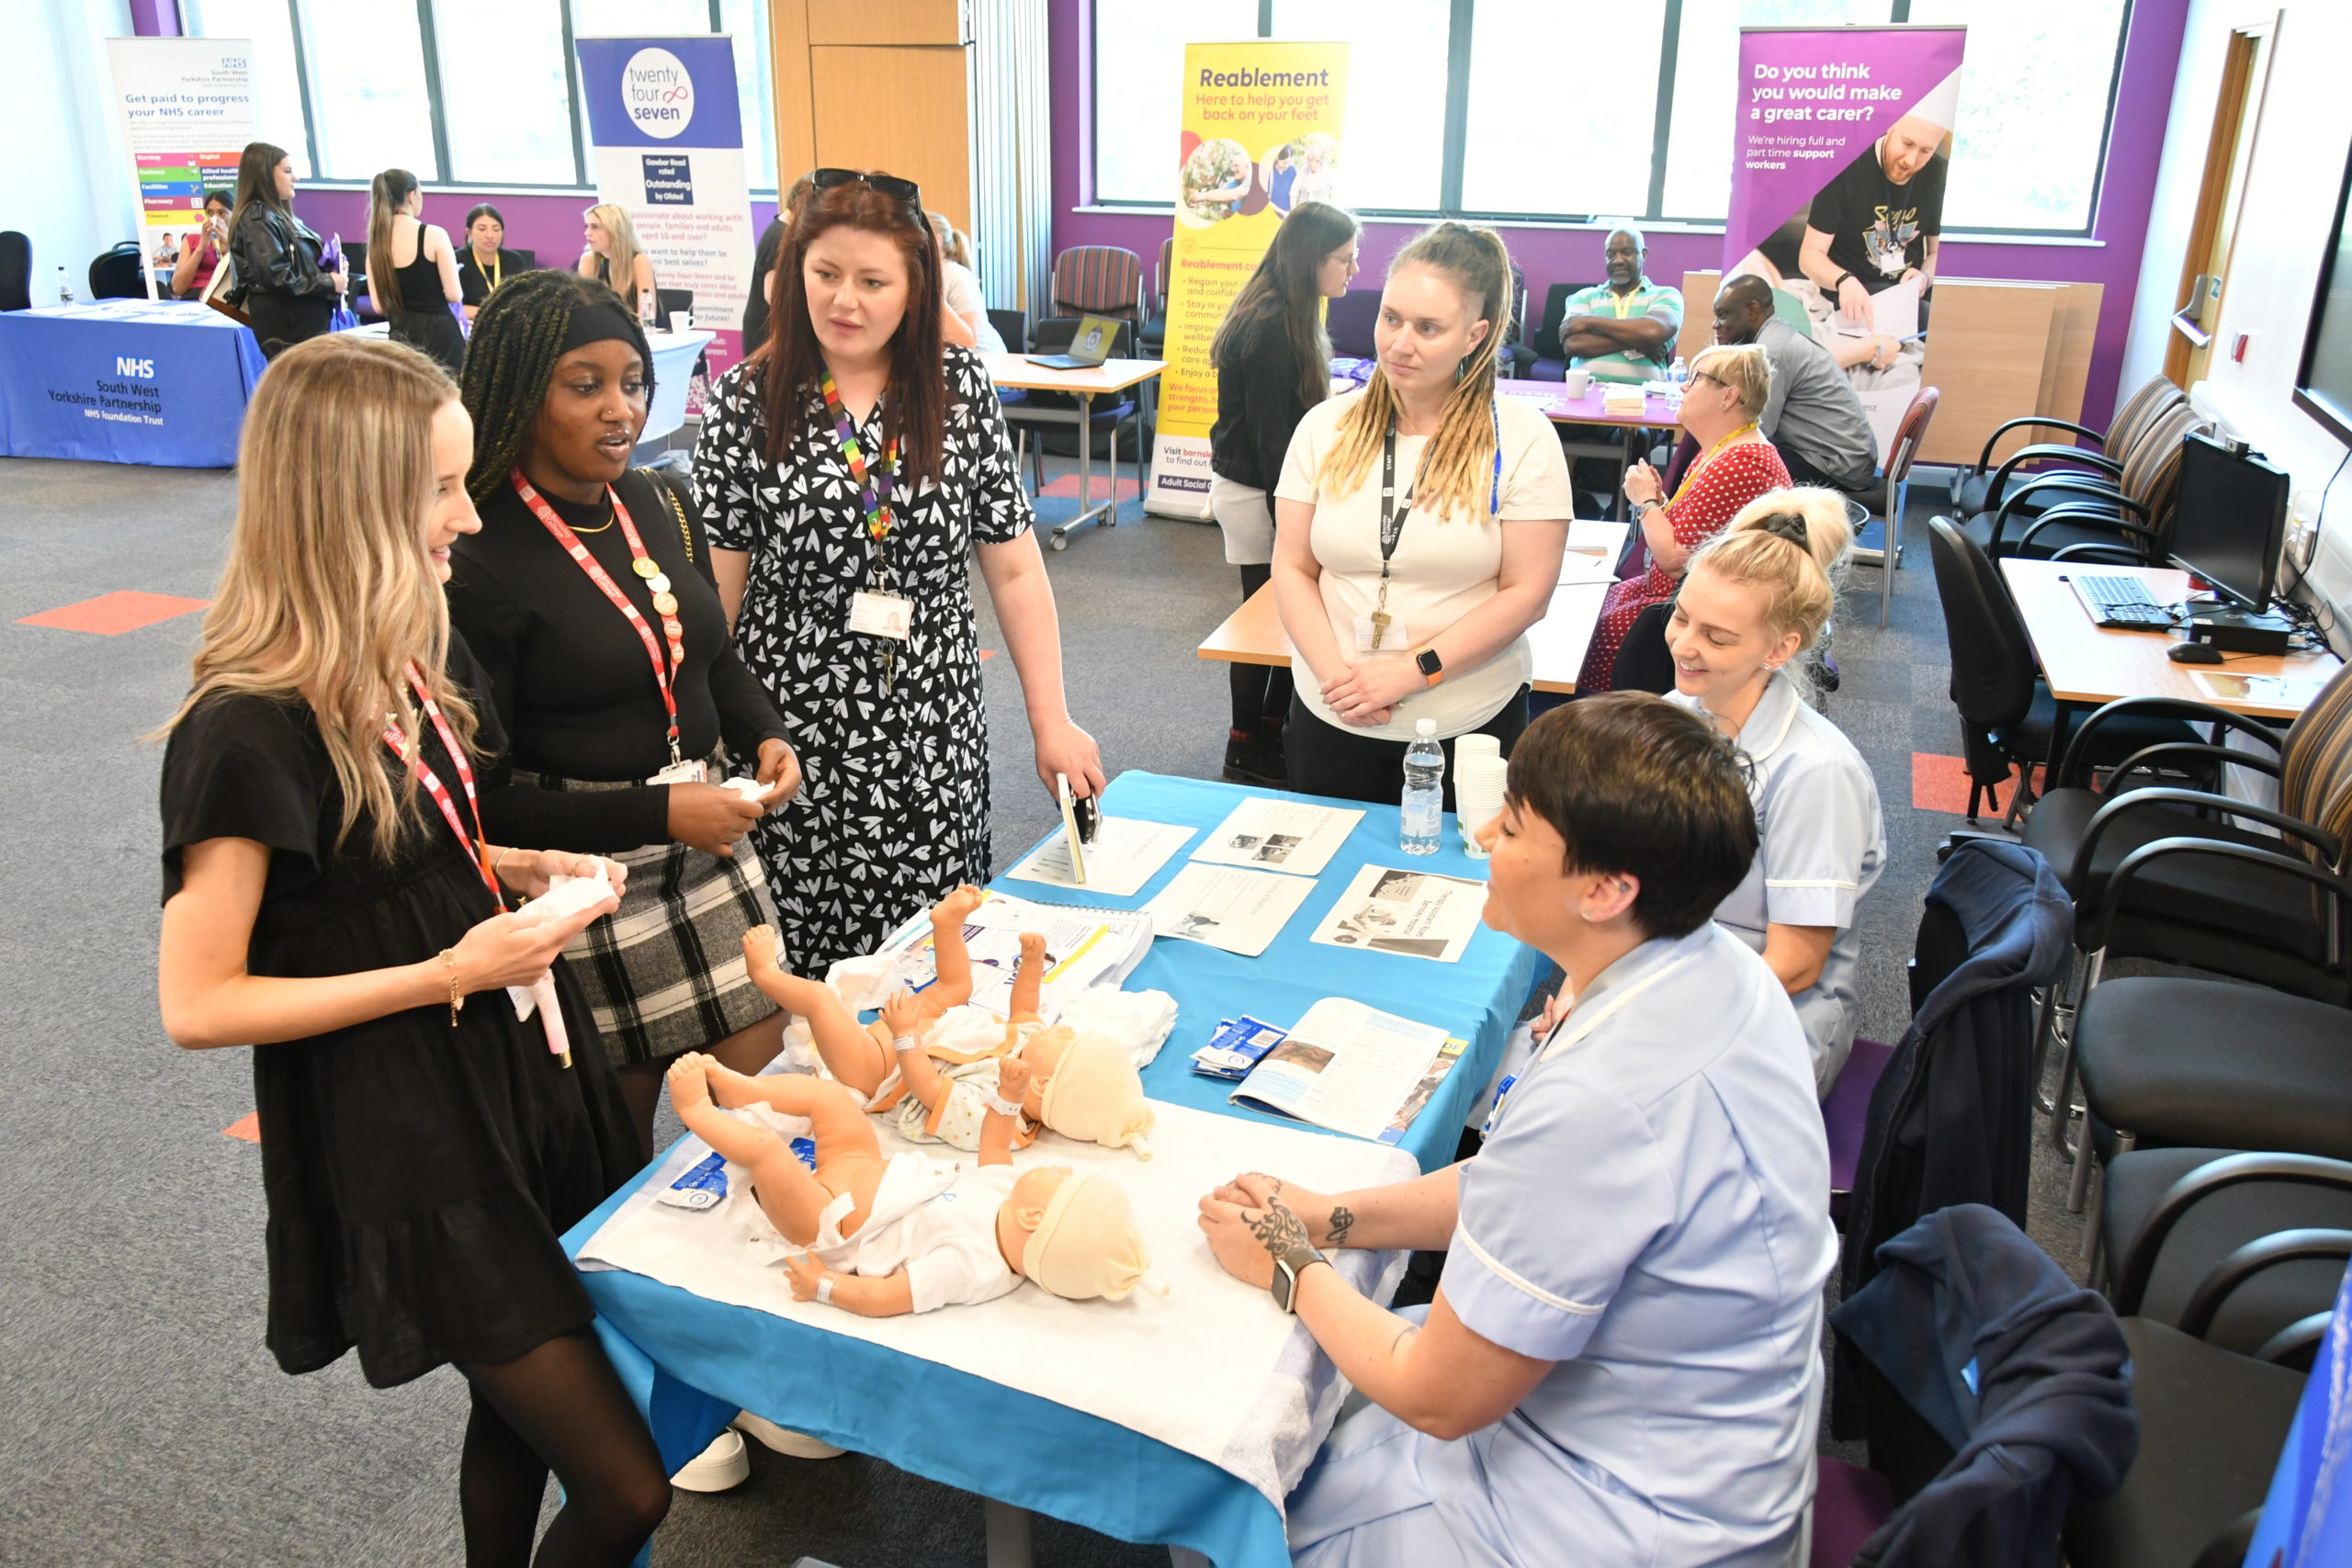 Two Health and Social Care students with Barnsley College staff and Midwives from Barnsley Hospital.